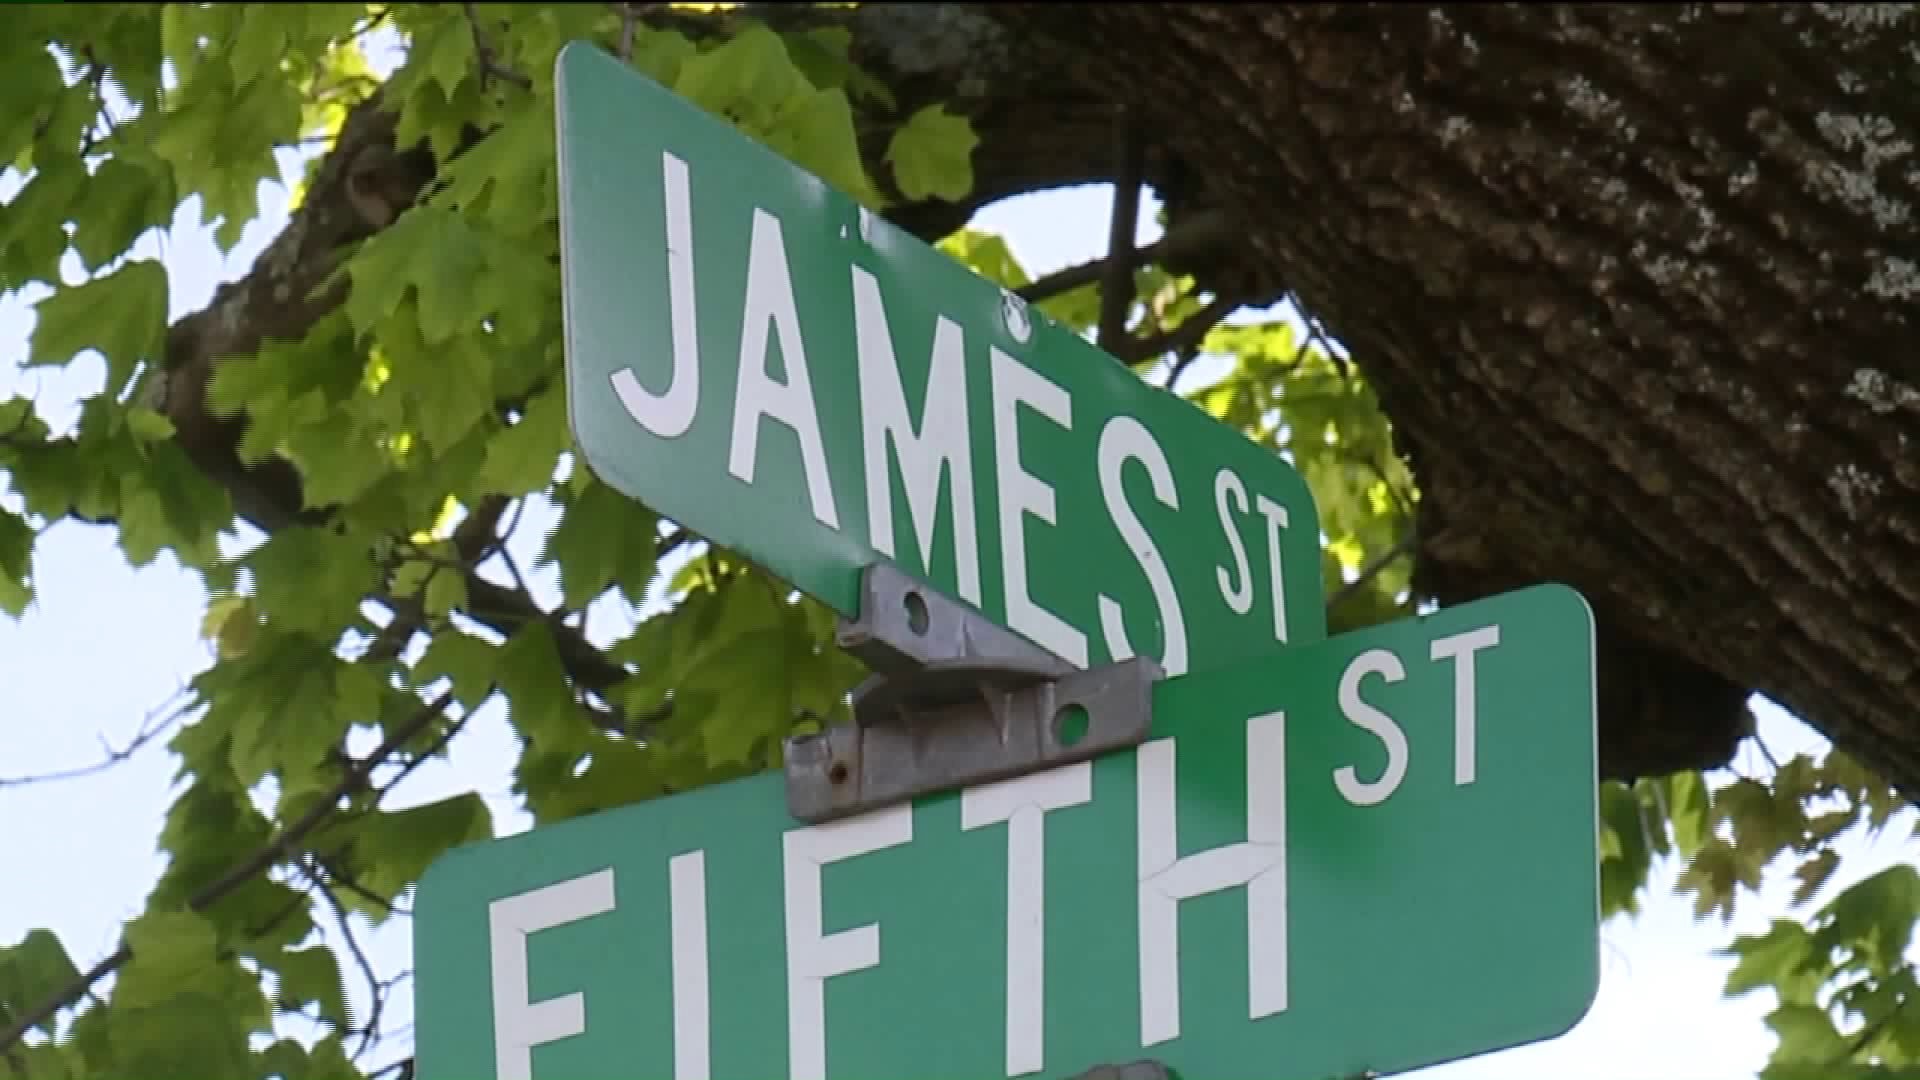 Street Names to Change After Confusion in Schuylkill County